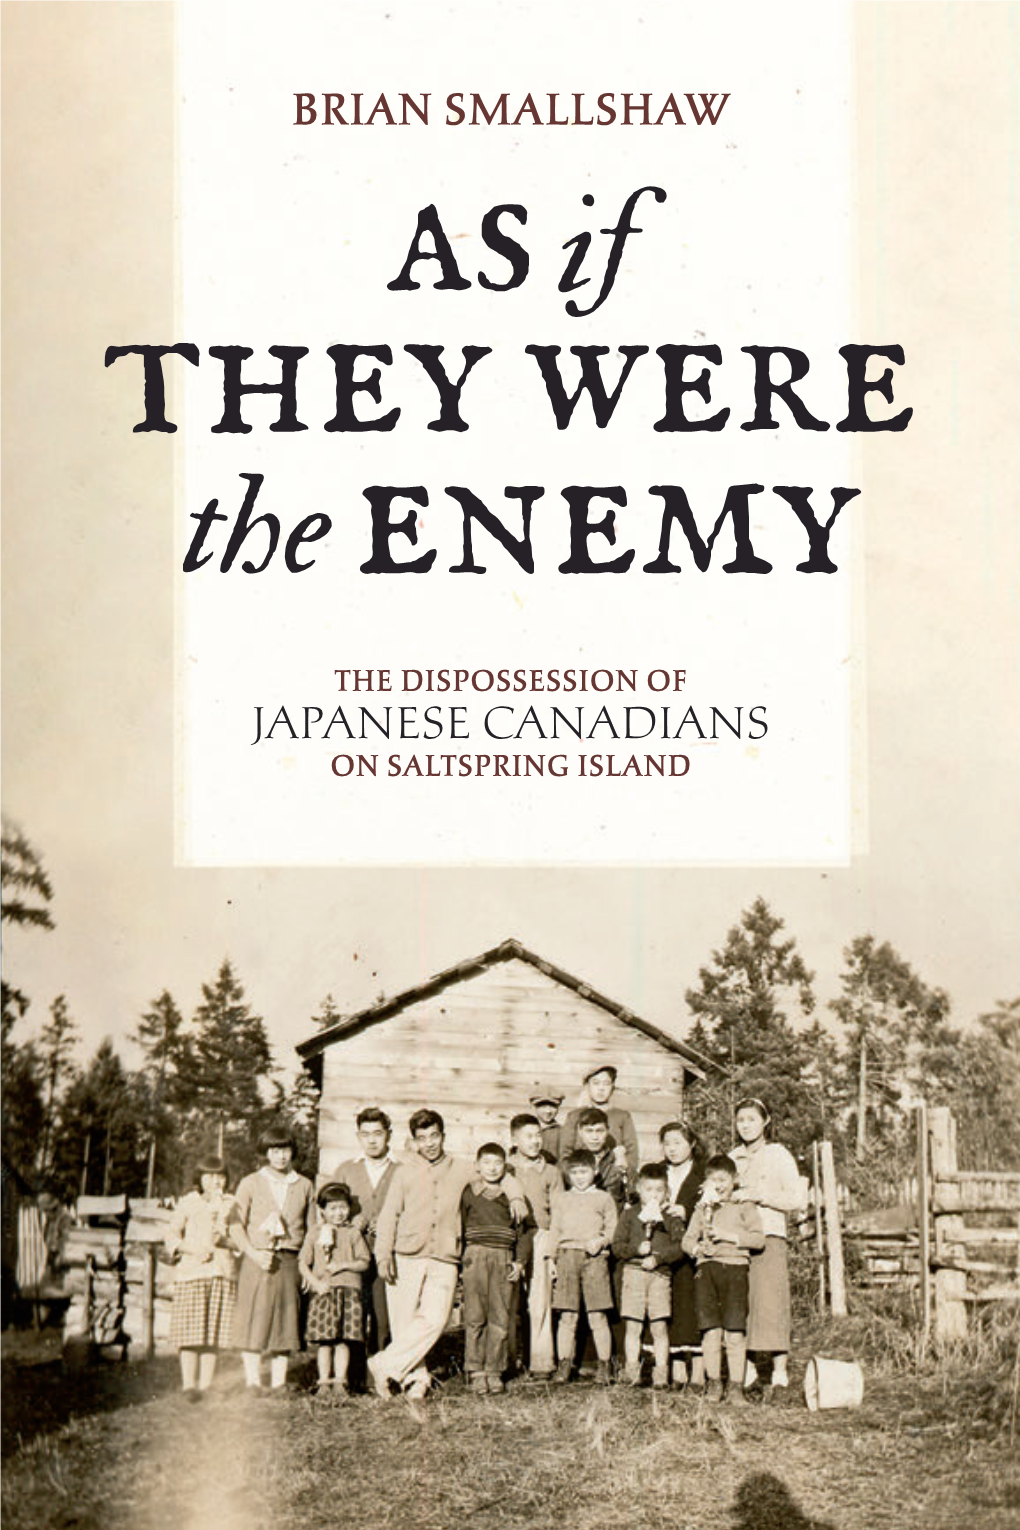 The Dispossession of Japanese Canadians on Saltspring Island